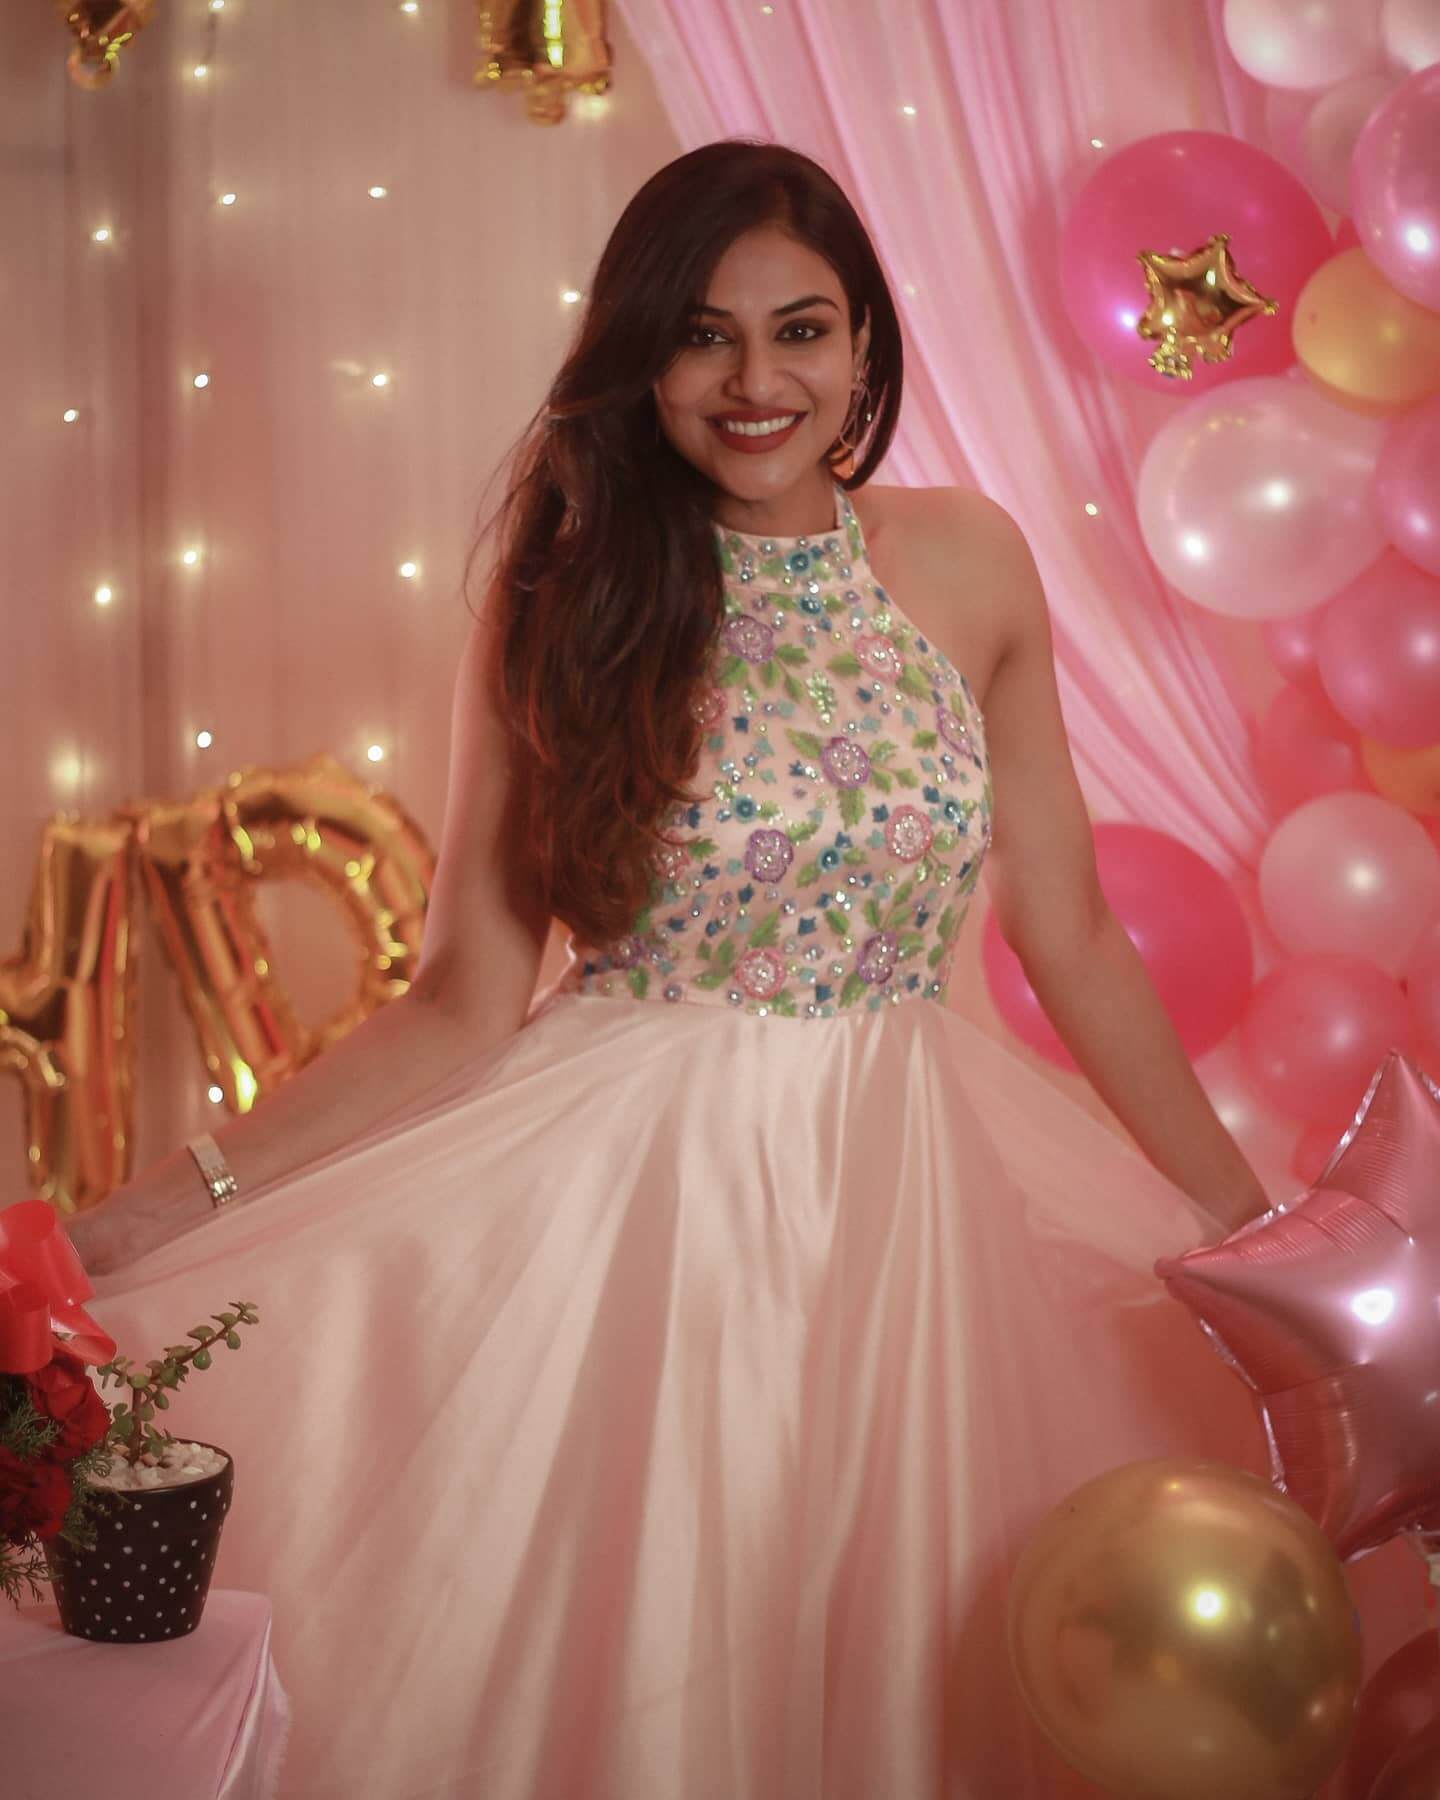 Indhuja Look Pretty IN Pink Halter Neck Fit & Flare Gown - Traditional & Western Outfits